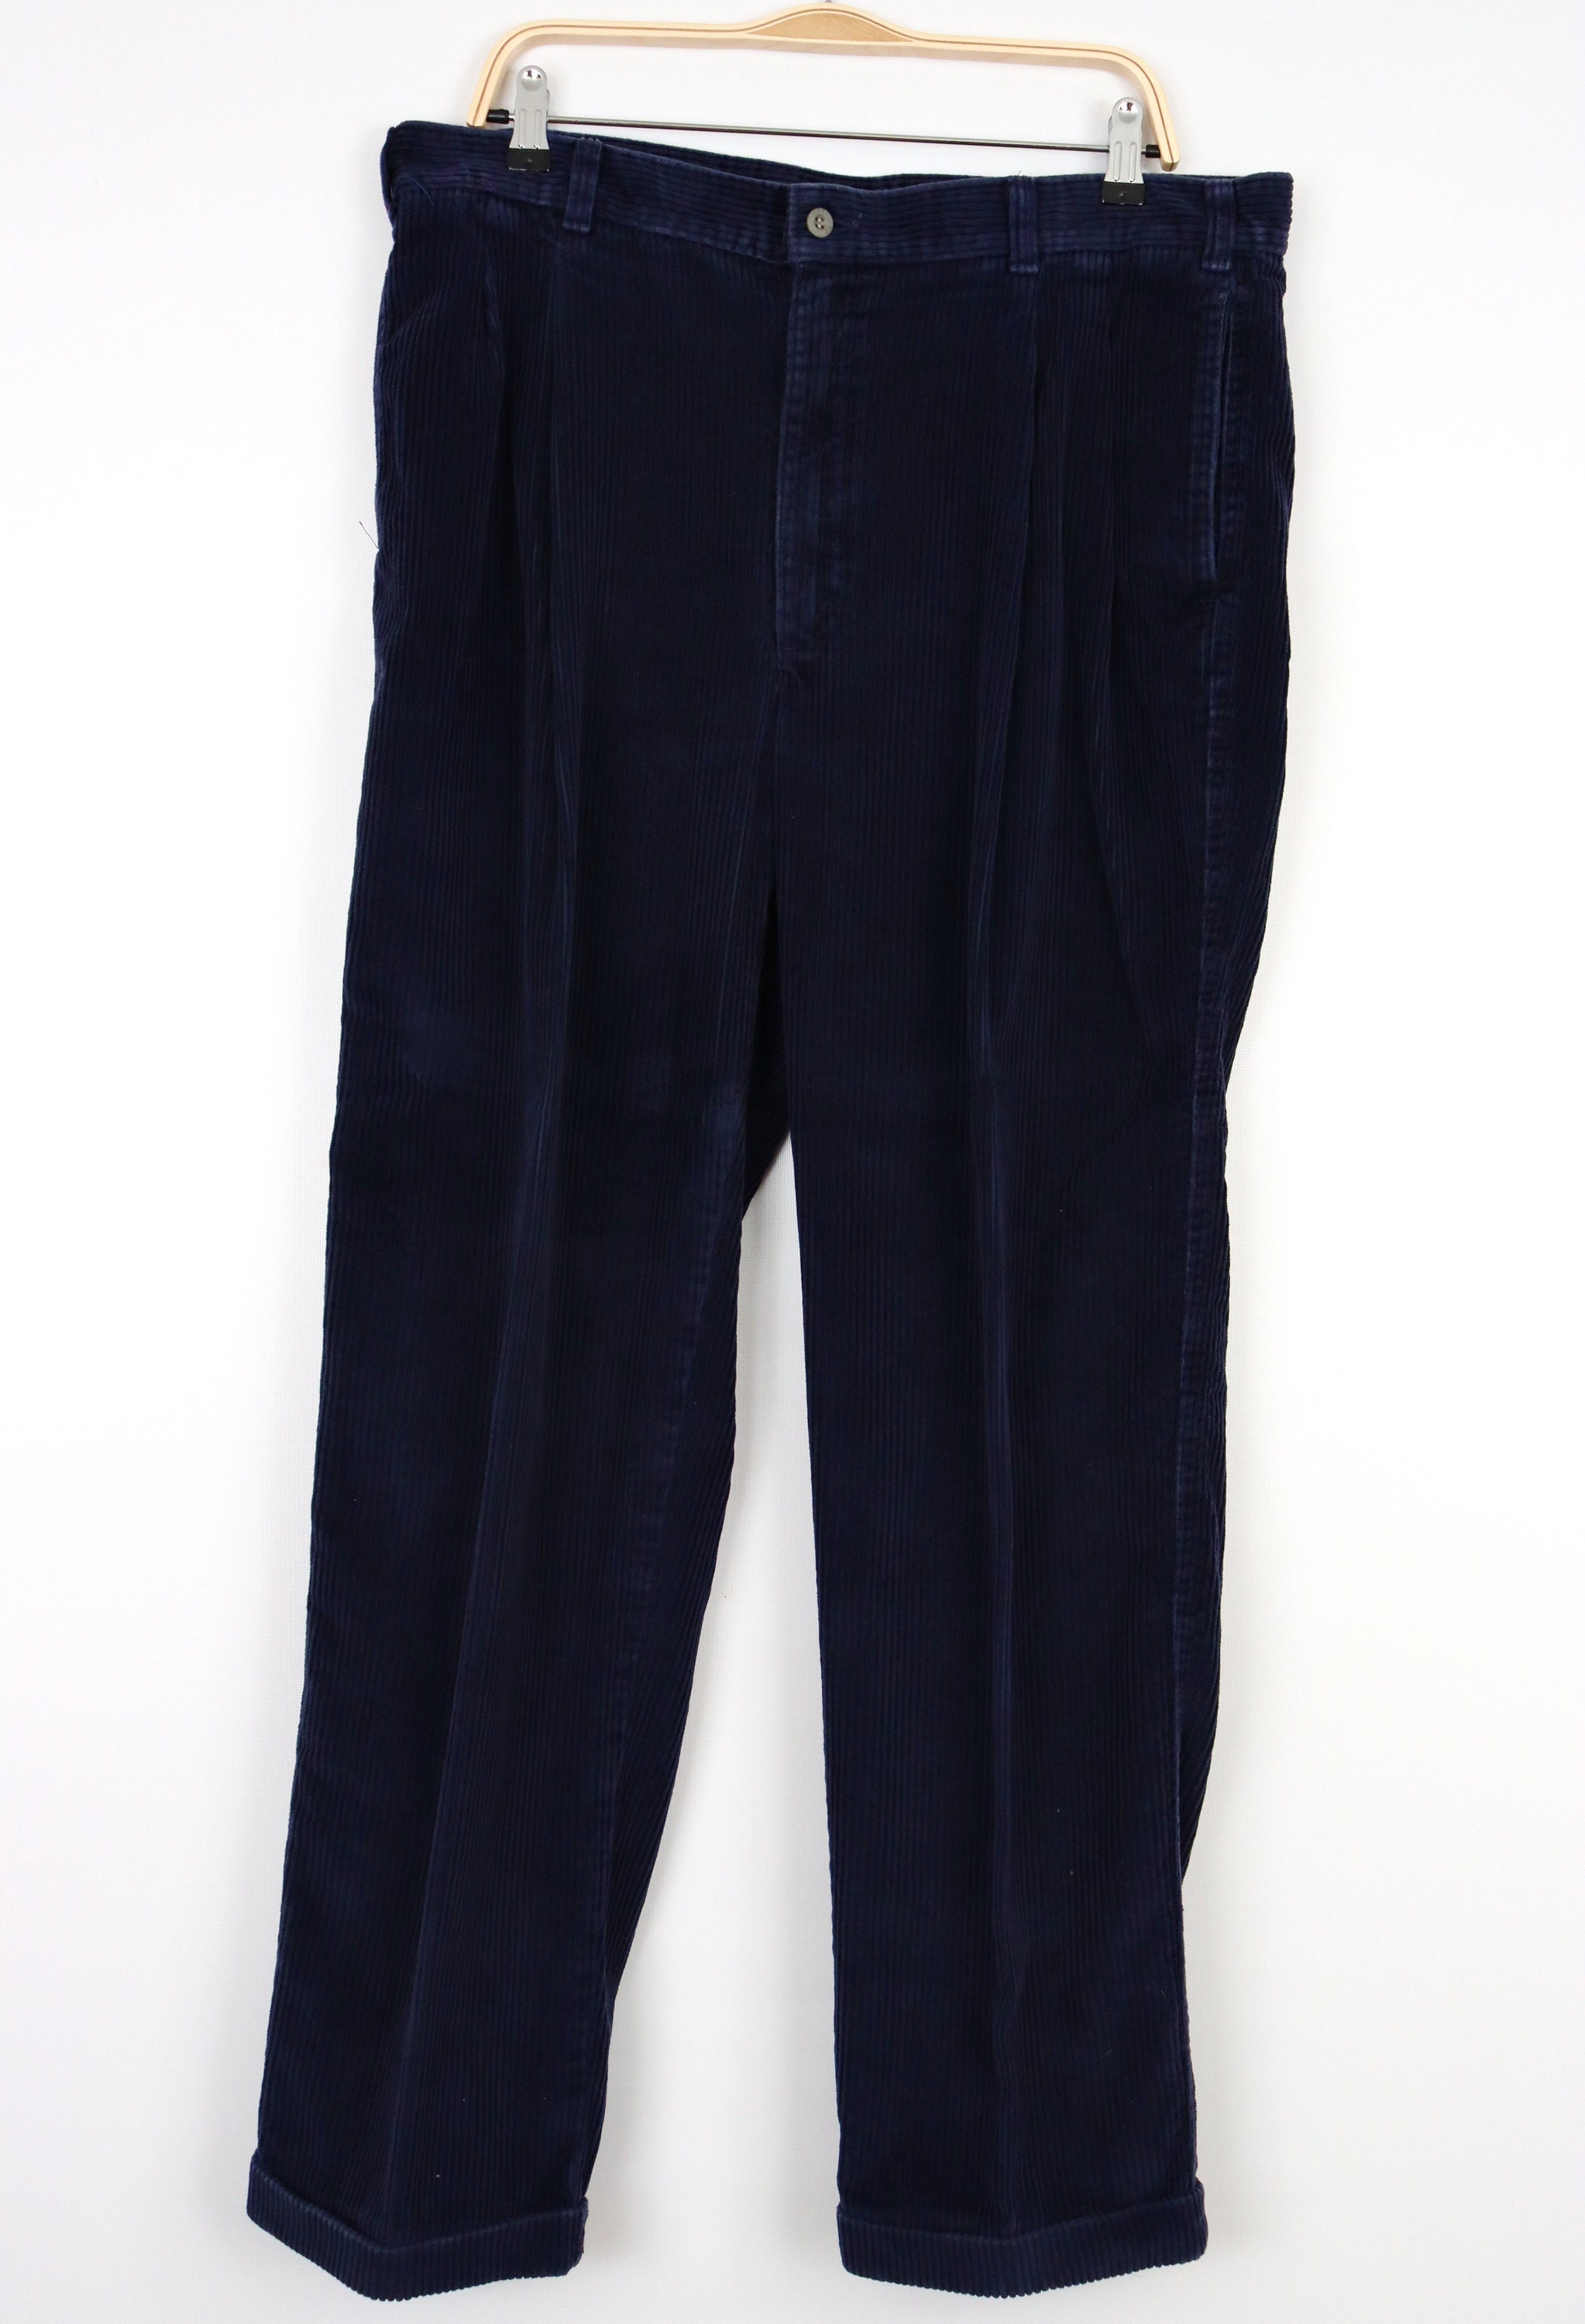 1980s-90s Navy Blue Corduroy Pants W/ Cuffs & Pleated - Etsy